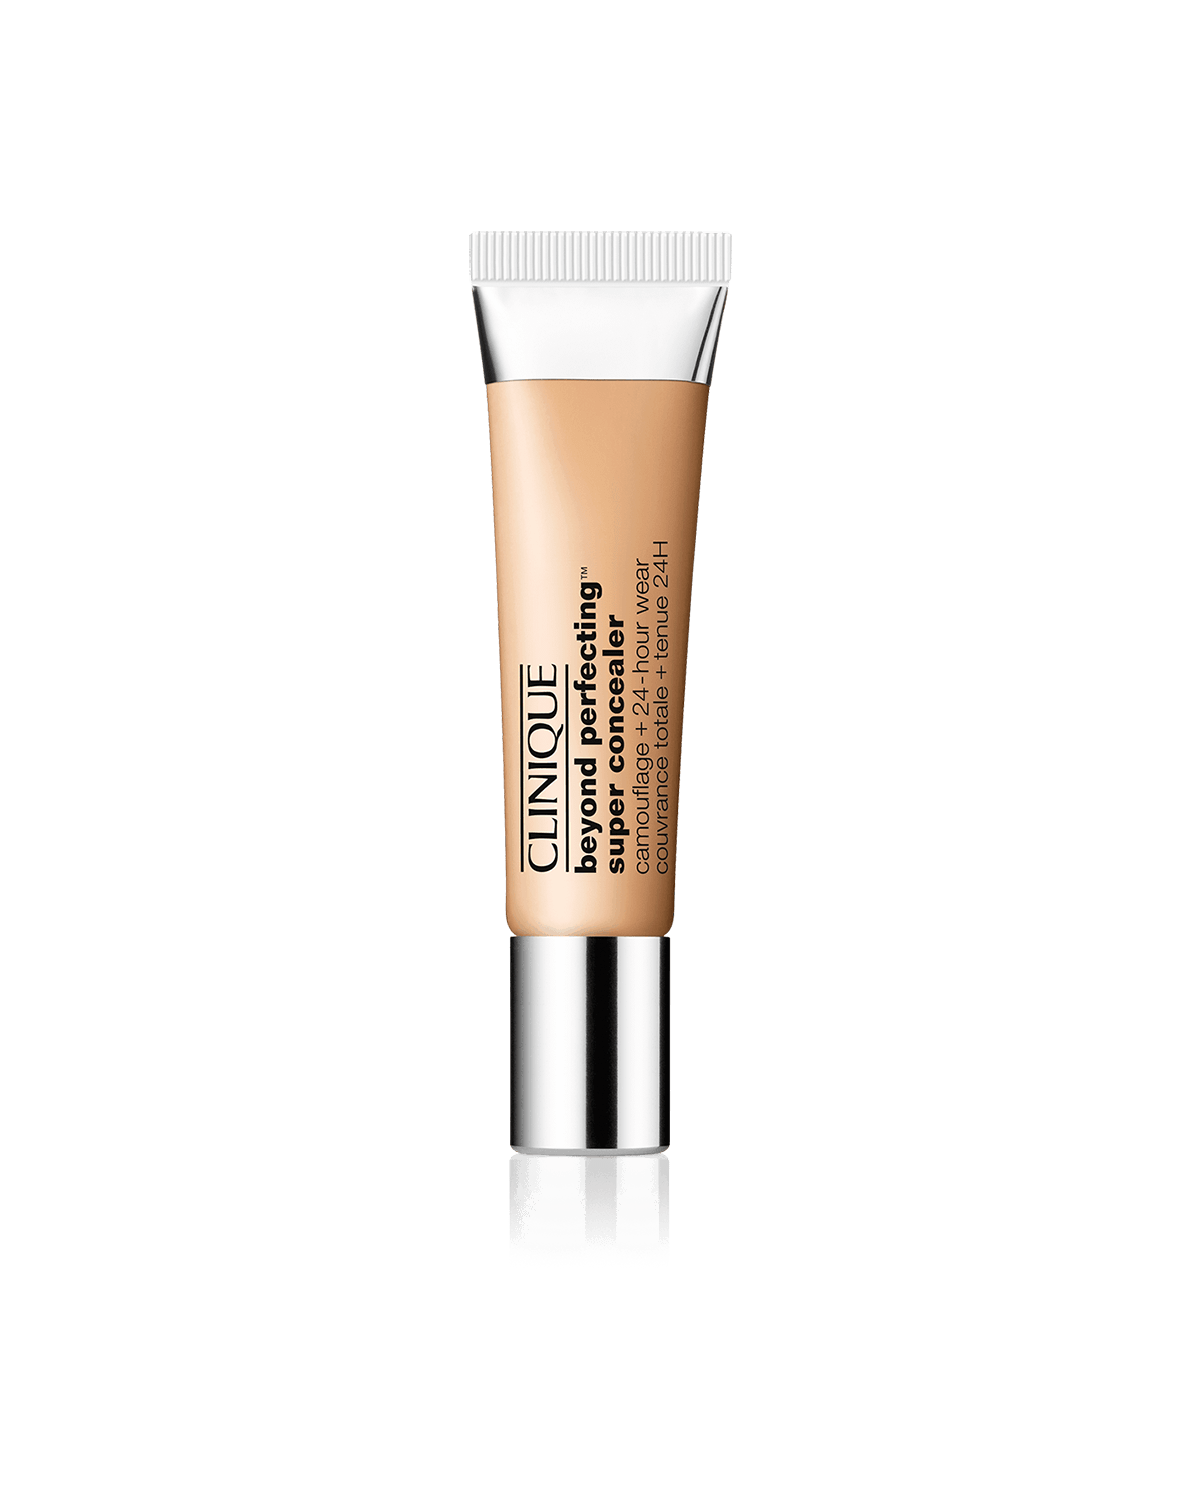 Beyond Perfecting™️ Super Concealer Camouflage + 24 Hour Wear